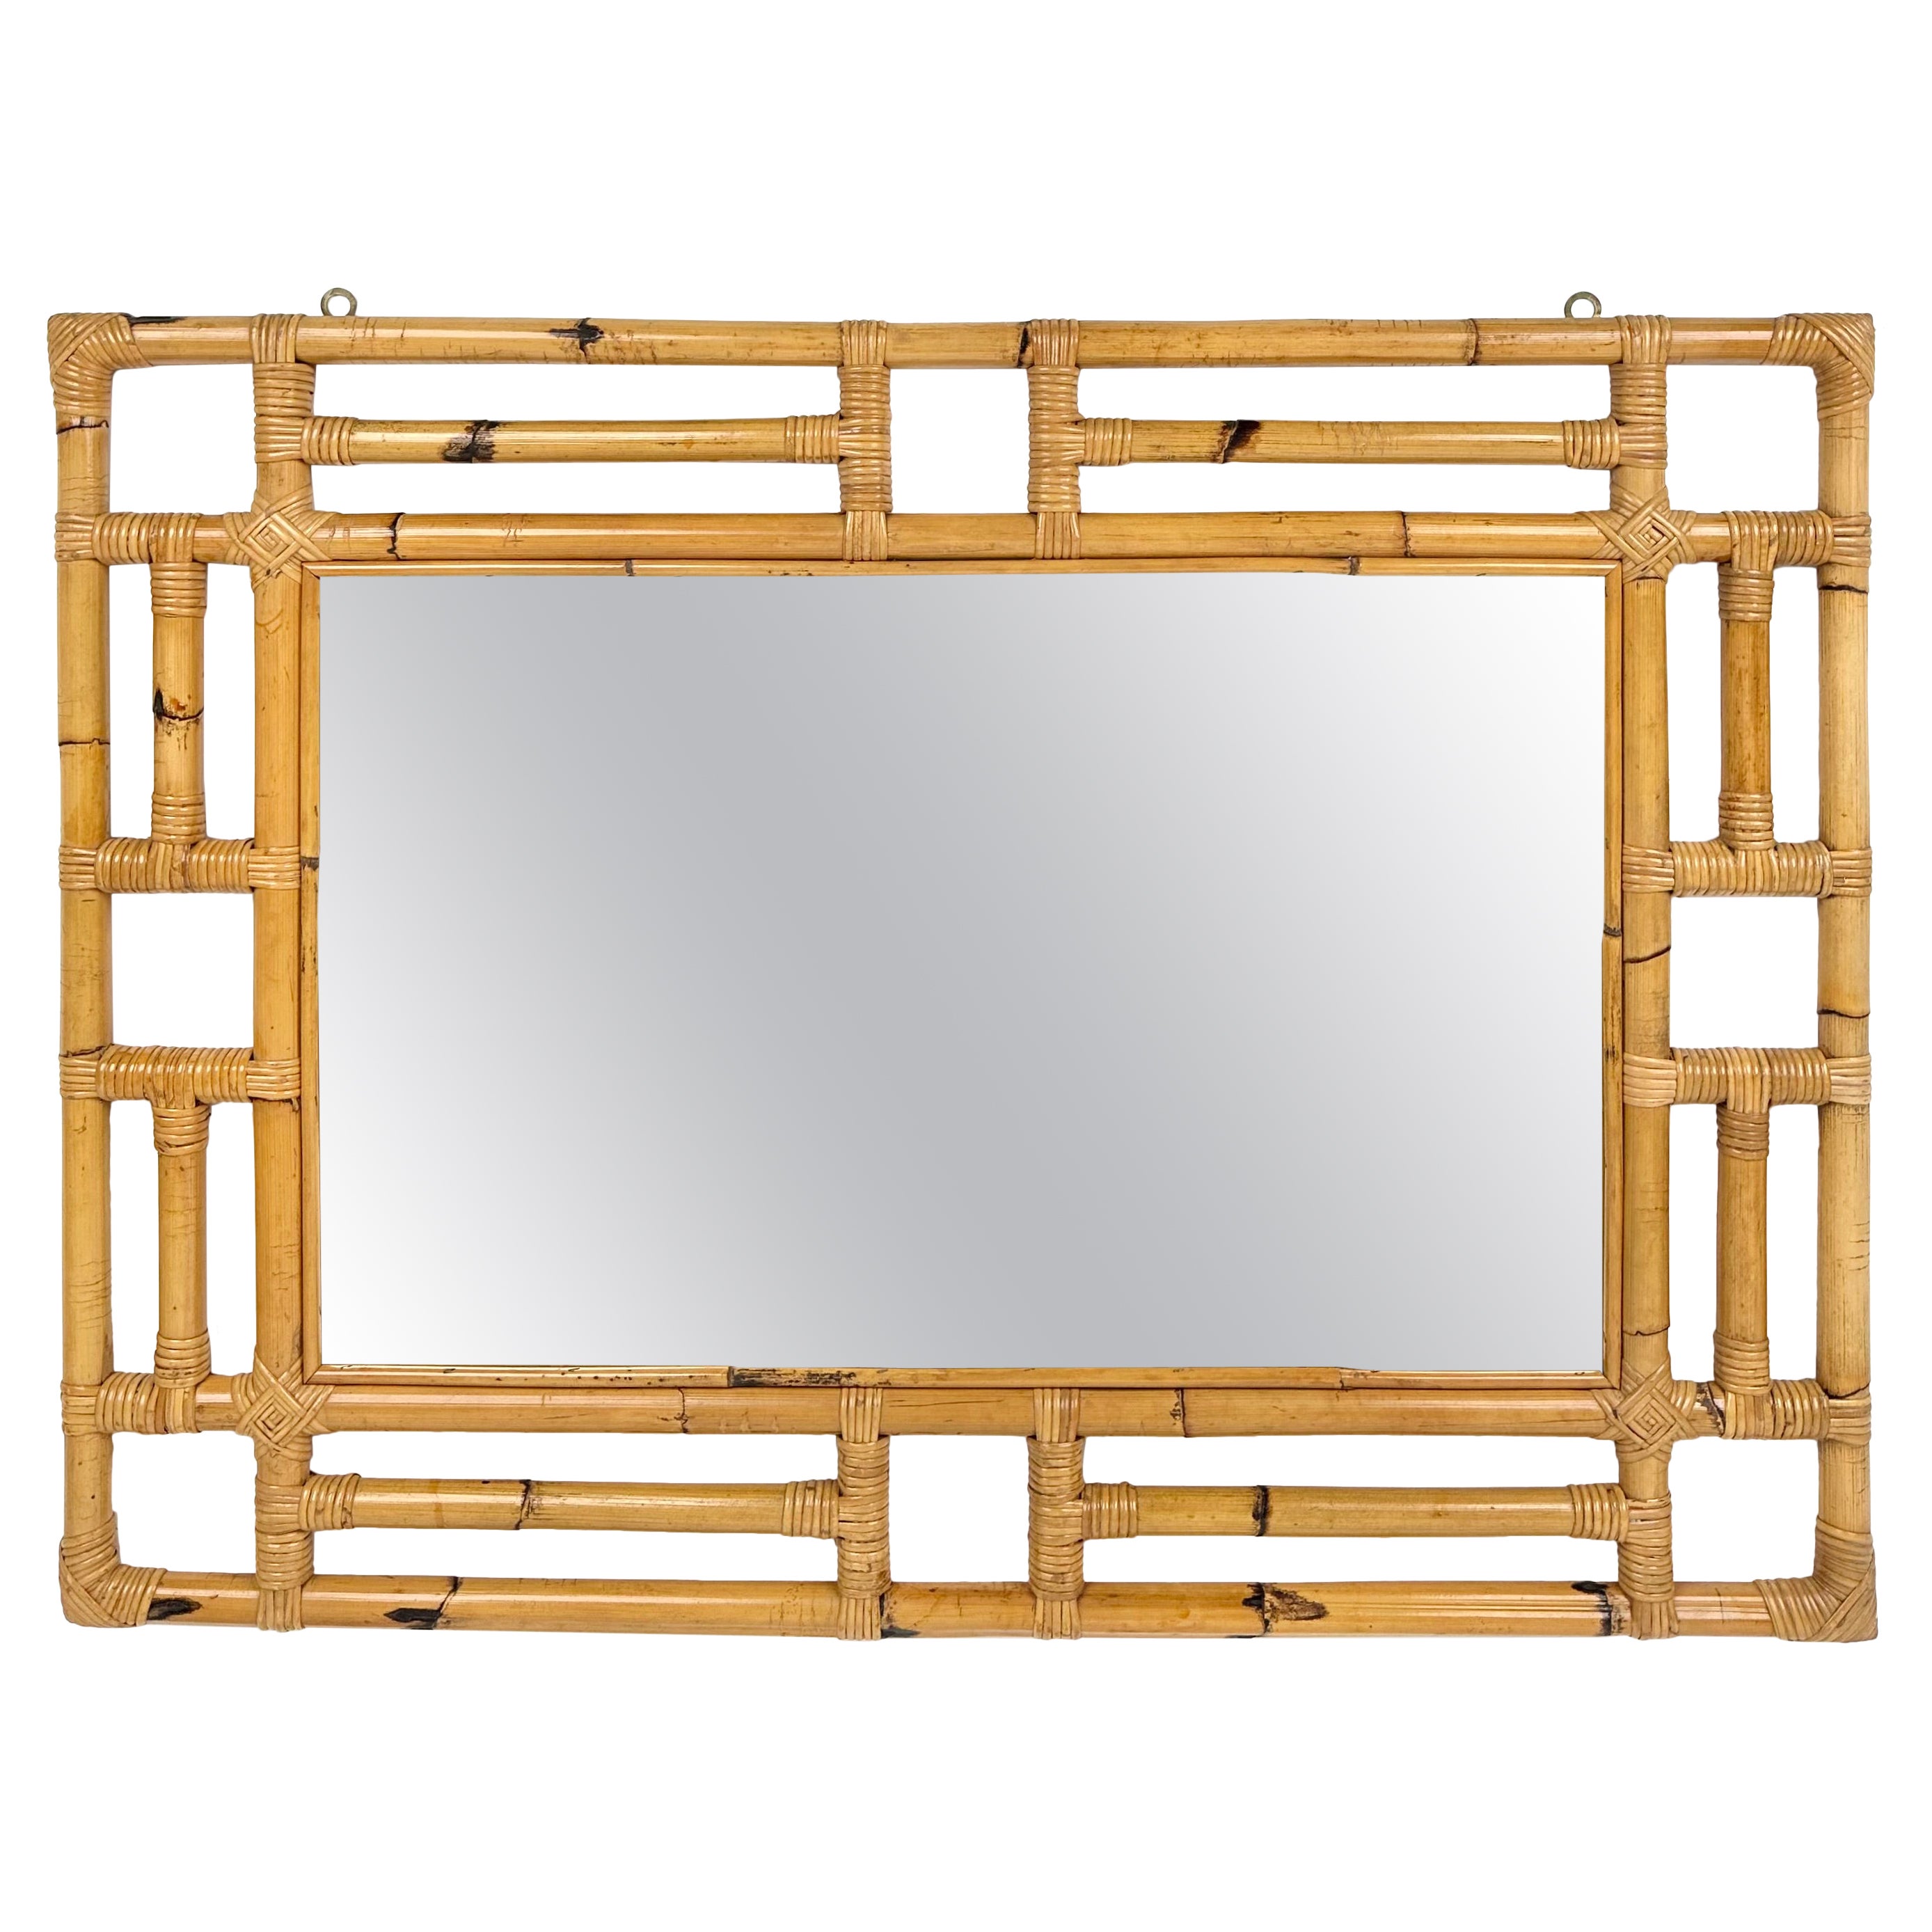 Rectangular Wall Mirror in Bamboo and Rattan Vivai del Sud Style, Italy 1970s